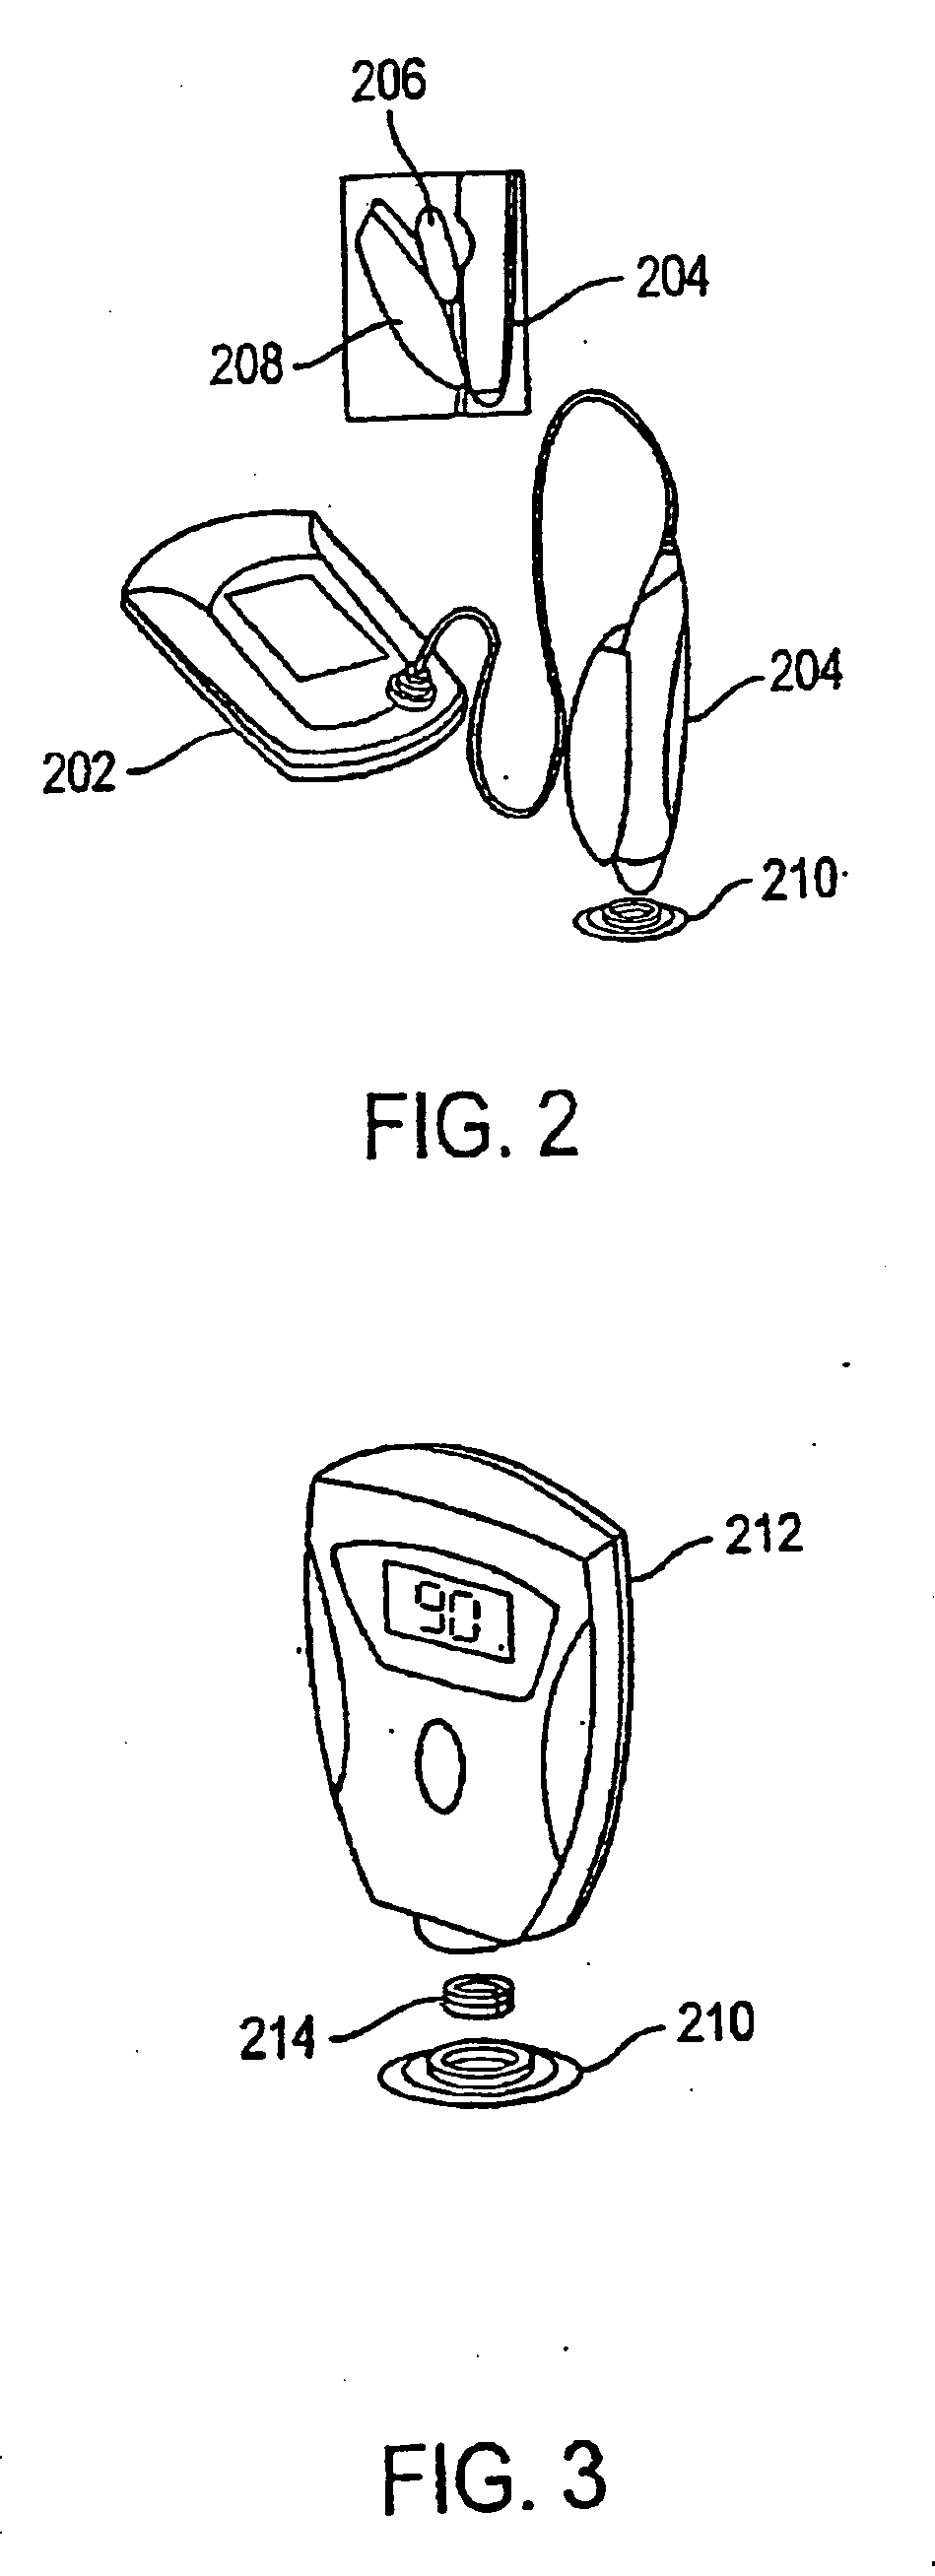 System and method for analyte sampling and analysis with hydrogel